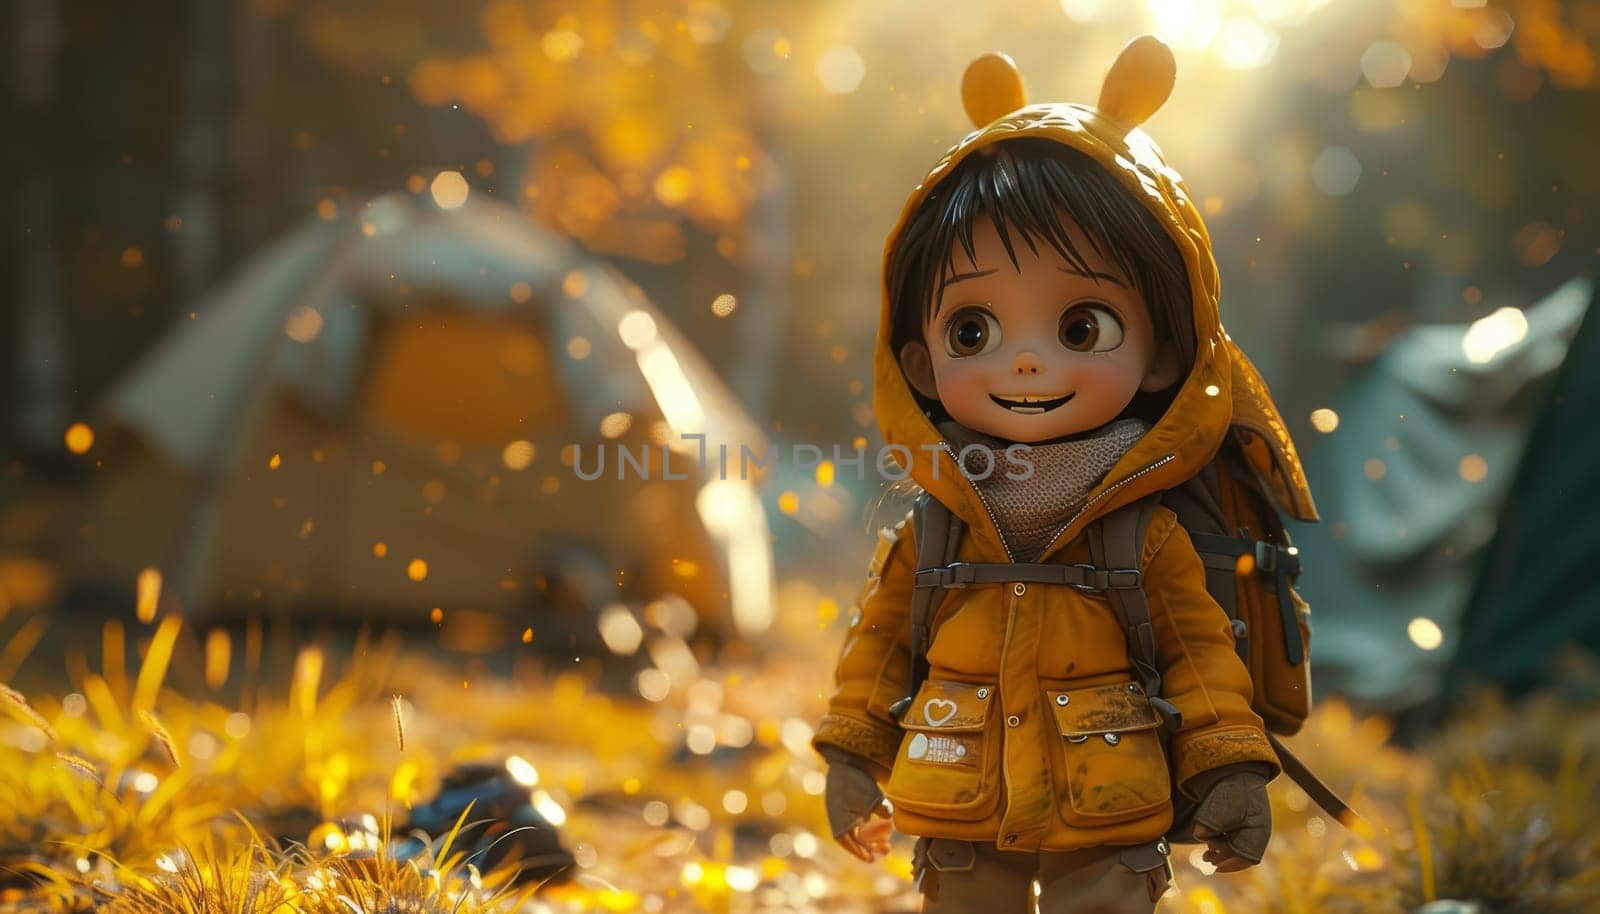 A cartoon girl is standing in a field with a yellow jacket on by AI generated image.